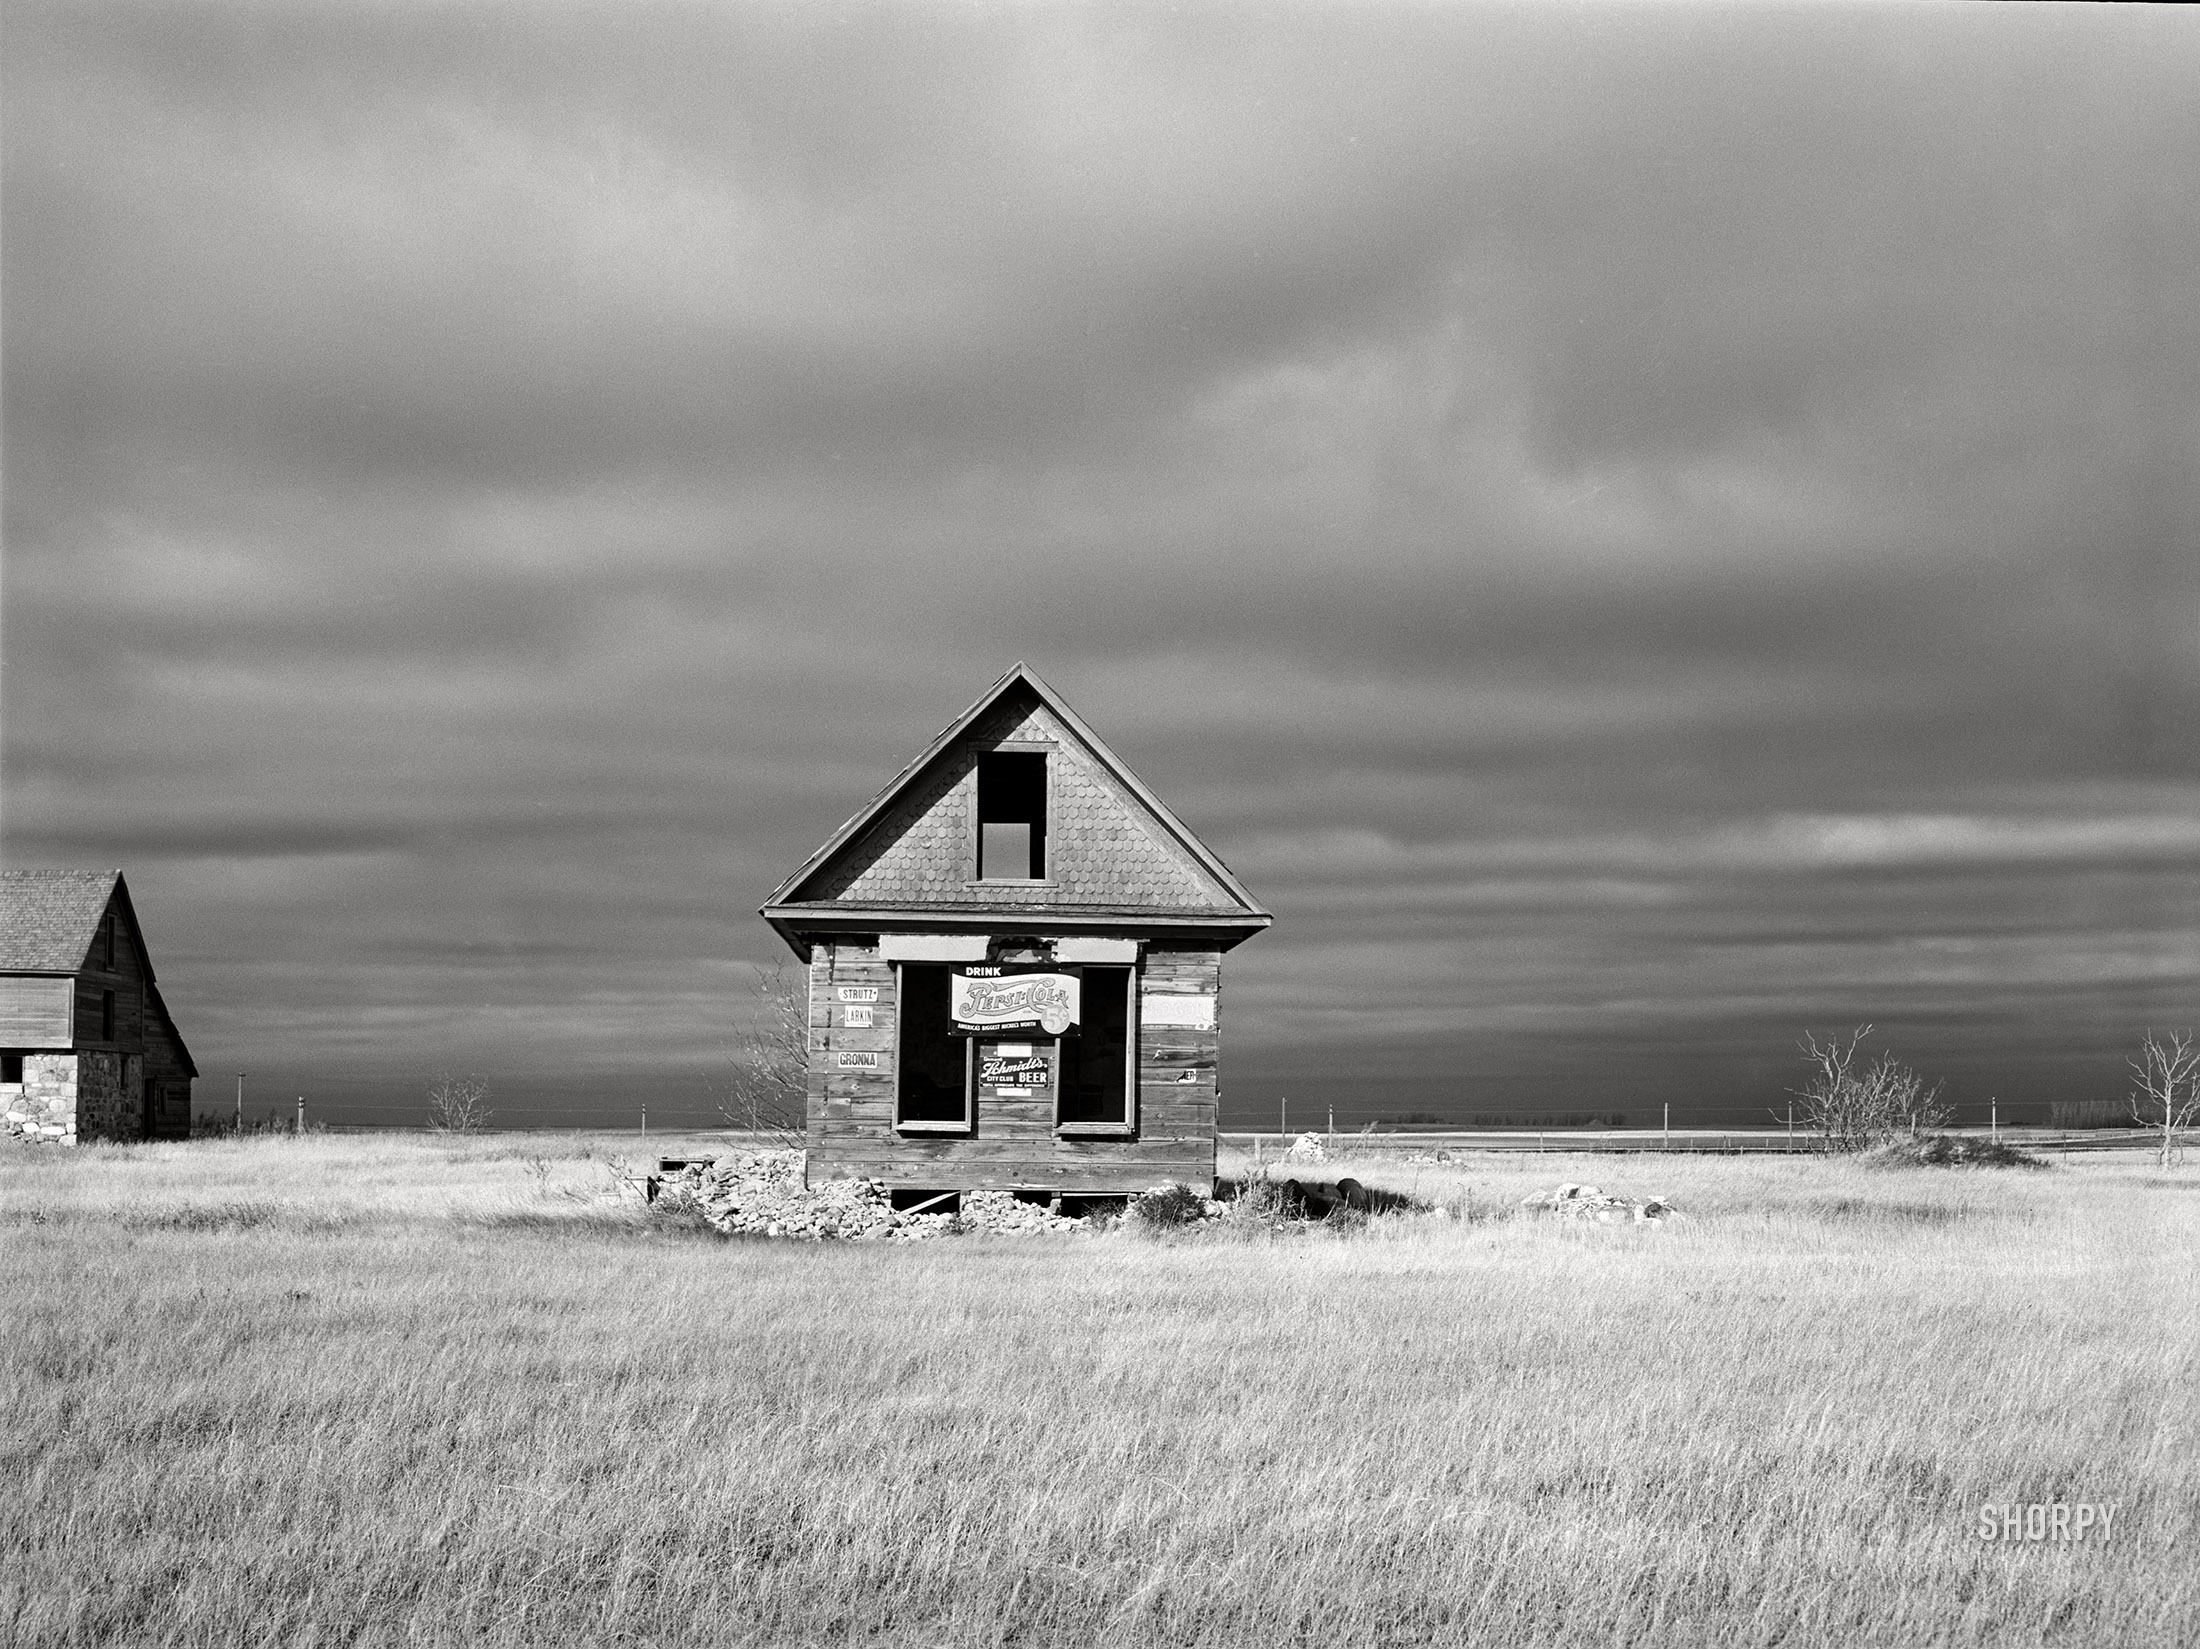 October 1940. "Abandoned farmhouse. Ward County, North Dakota." Medium format acetate negative by John Vachon for the Farm Security Administration. View full size.